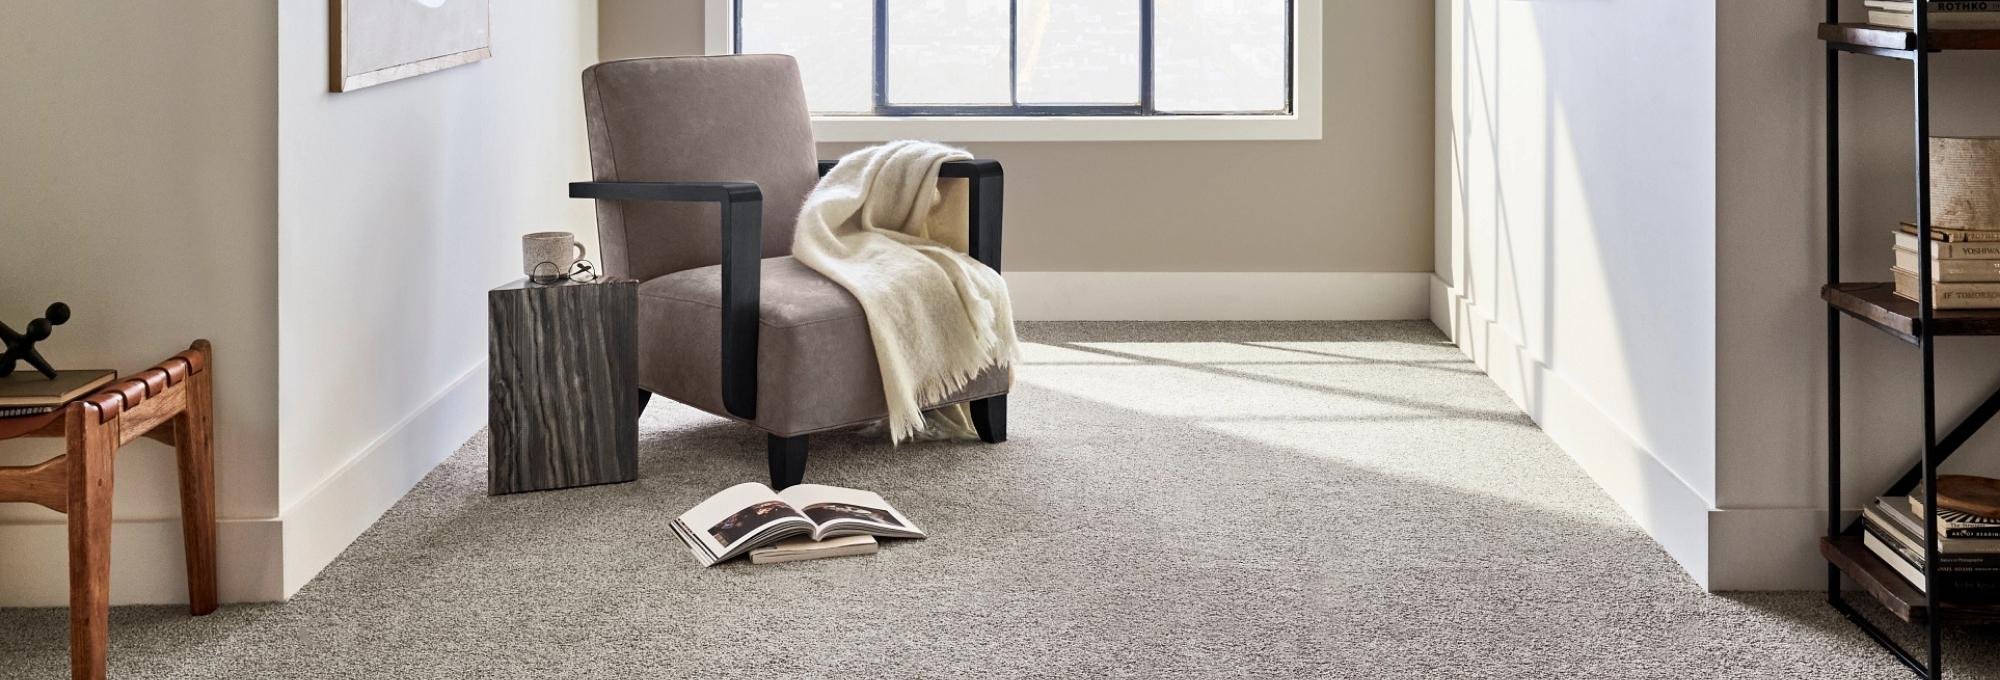 Carpet with chair